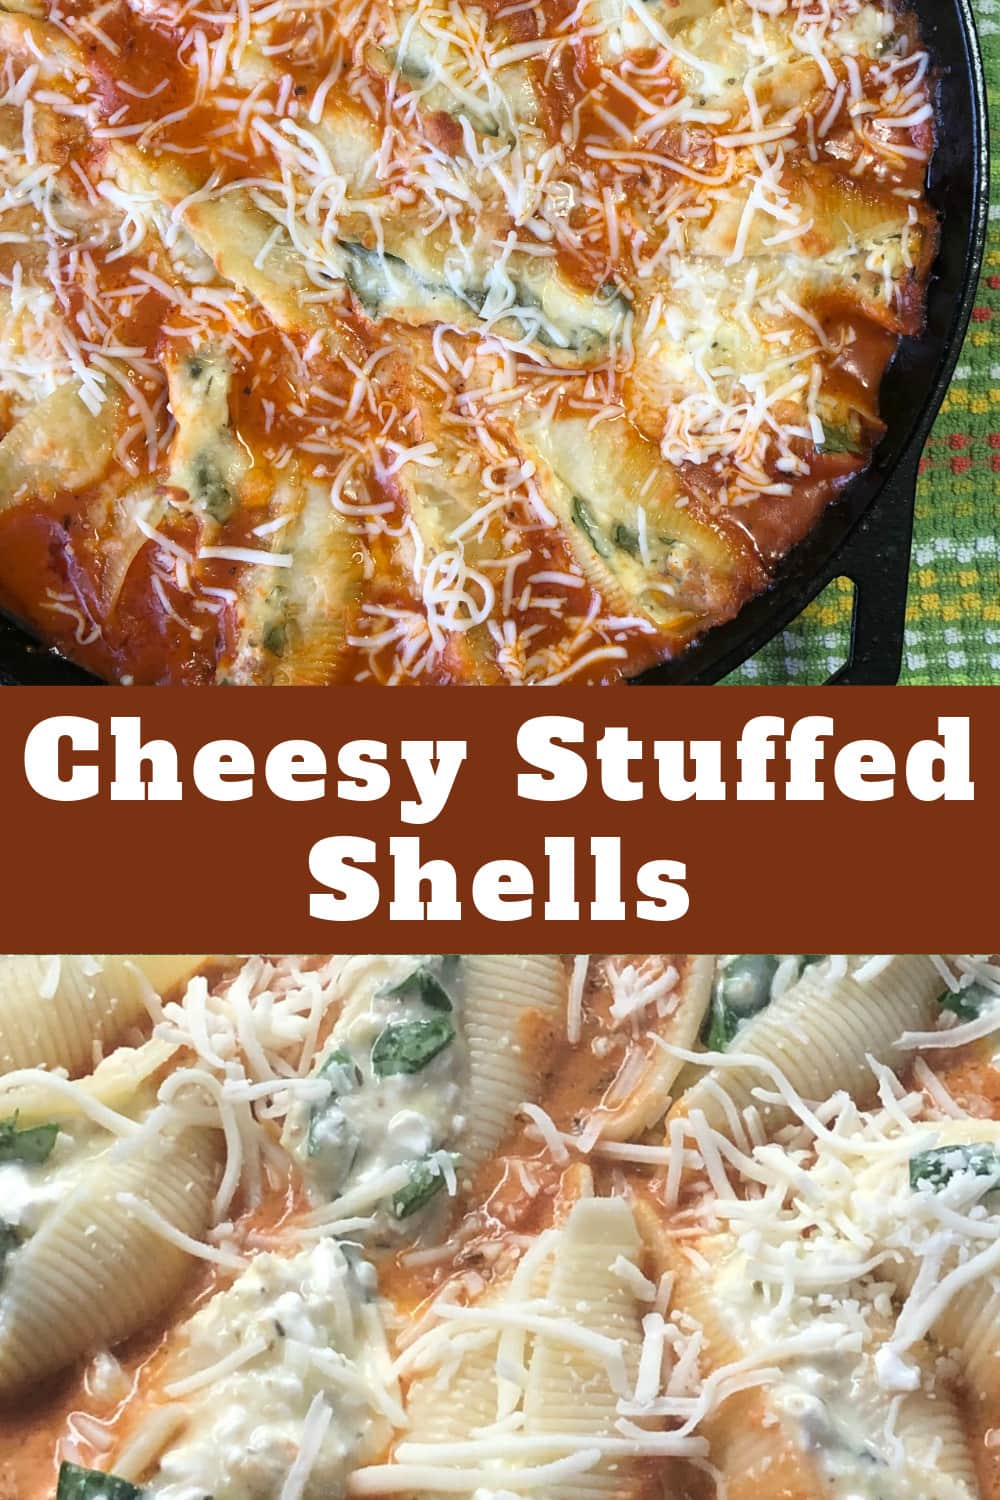 Cheesy Stuffed Pasta Shells baked in a cast iron skillet.